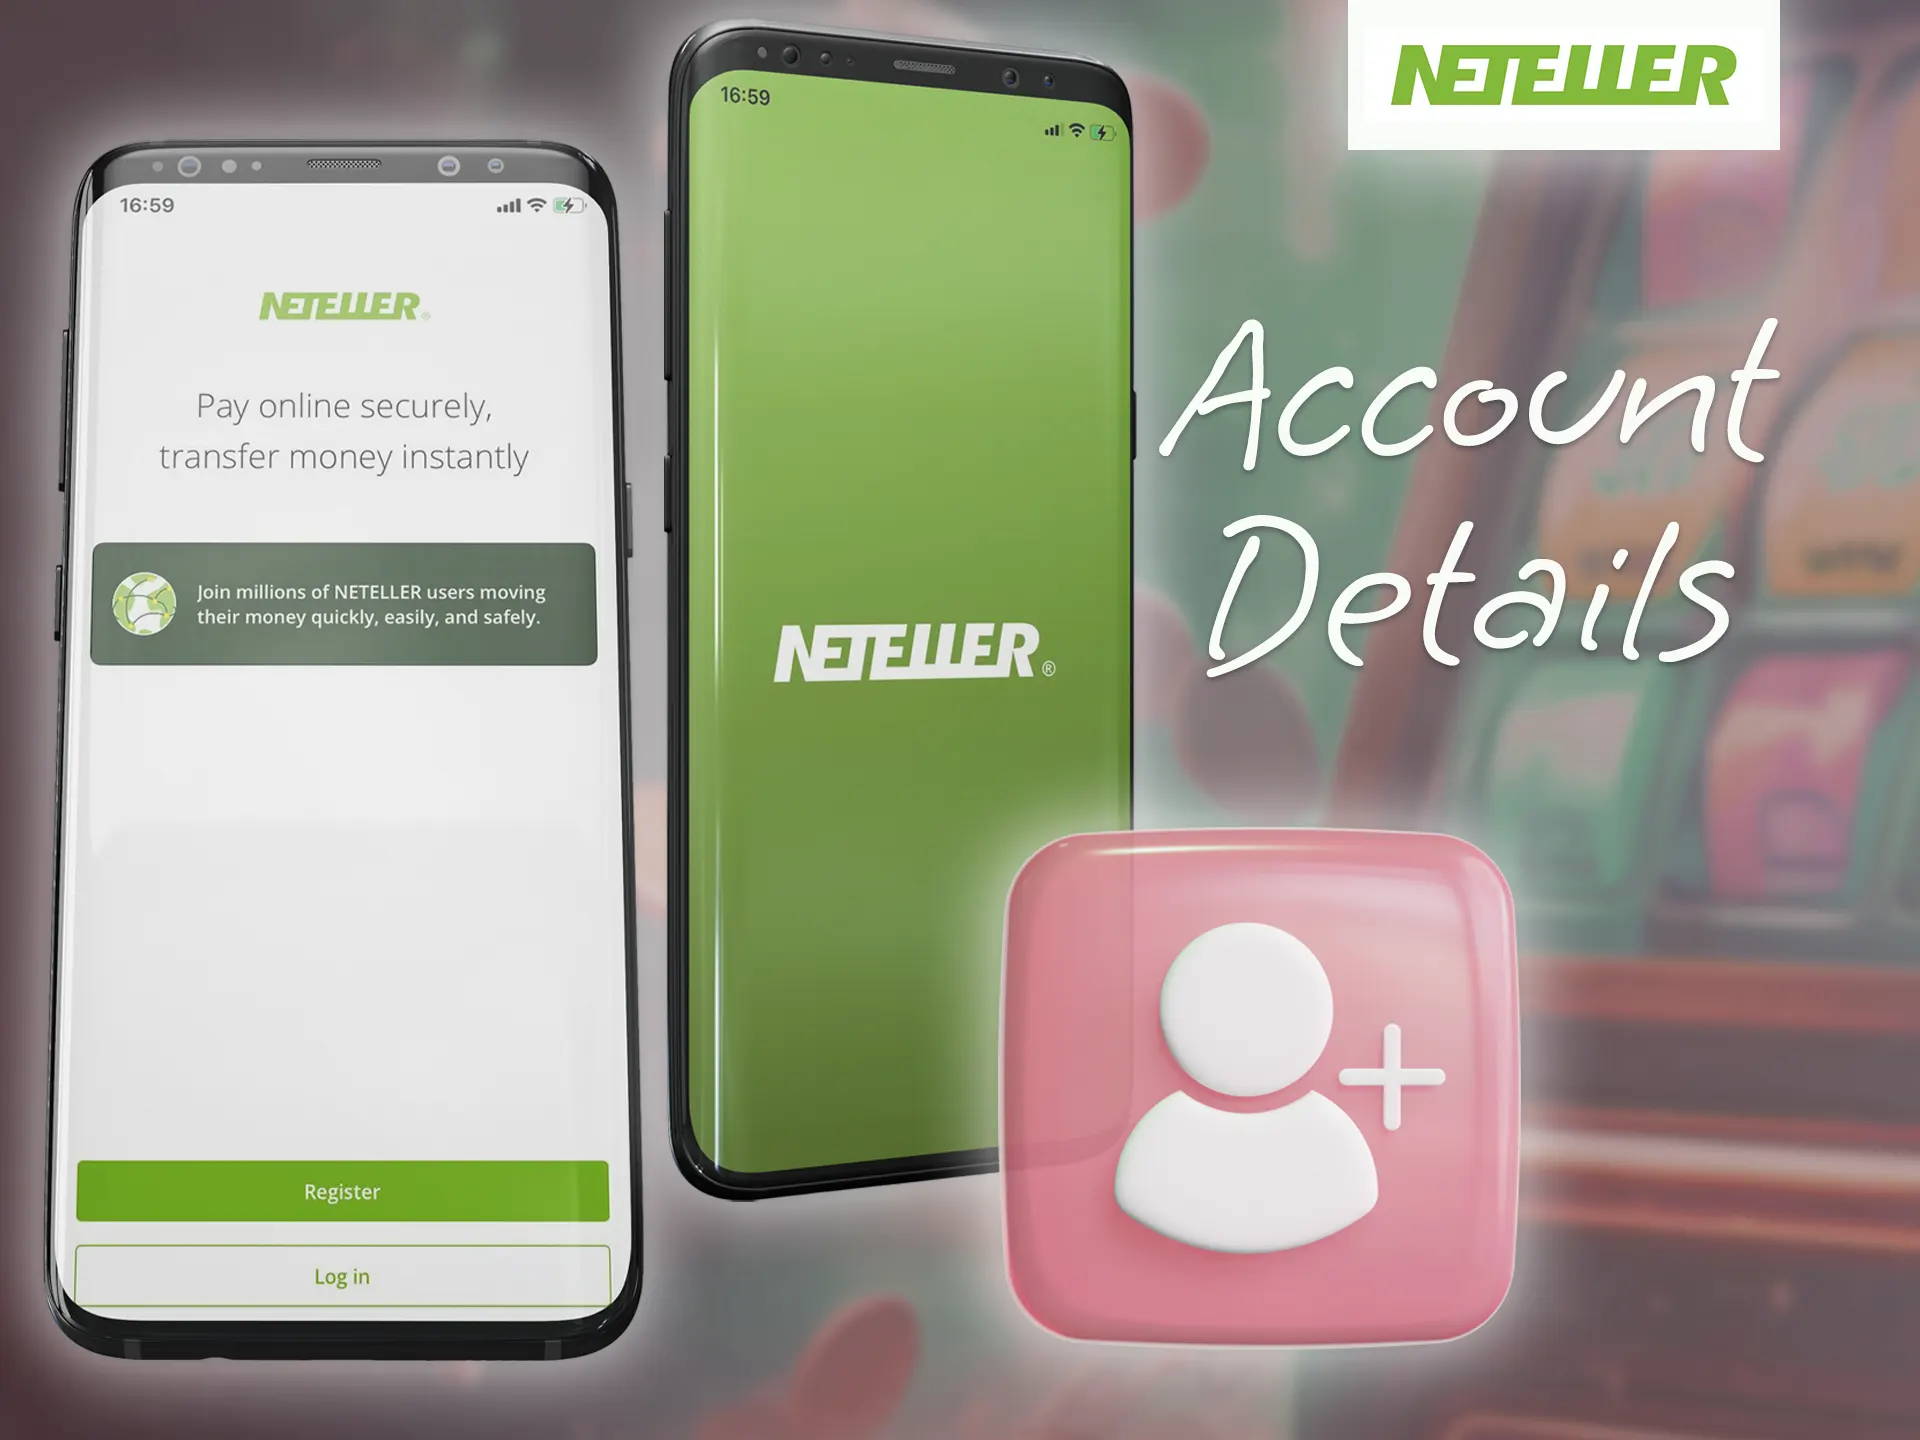 Make money transfers fast and easy with Neteller.